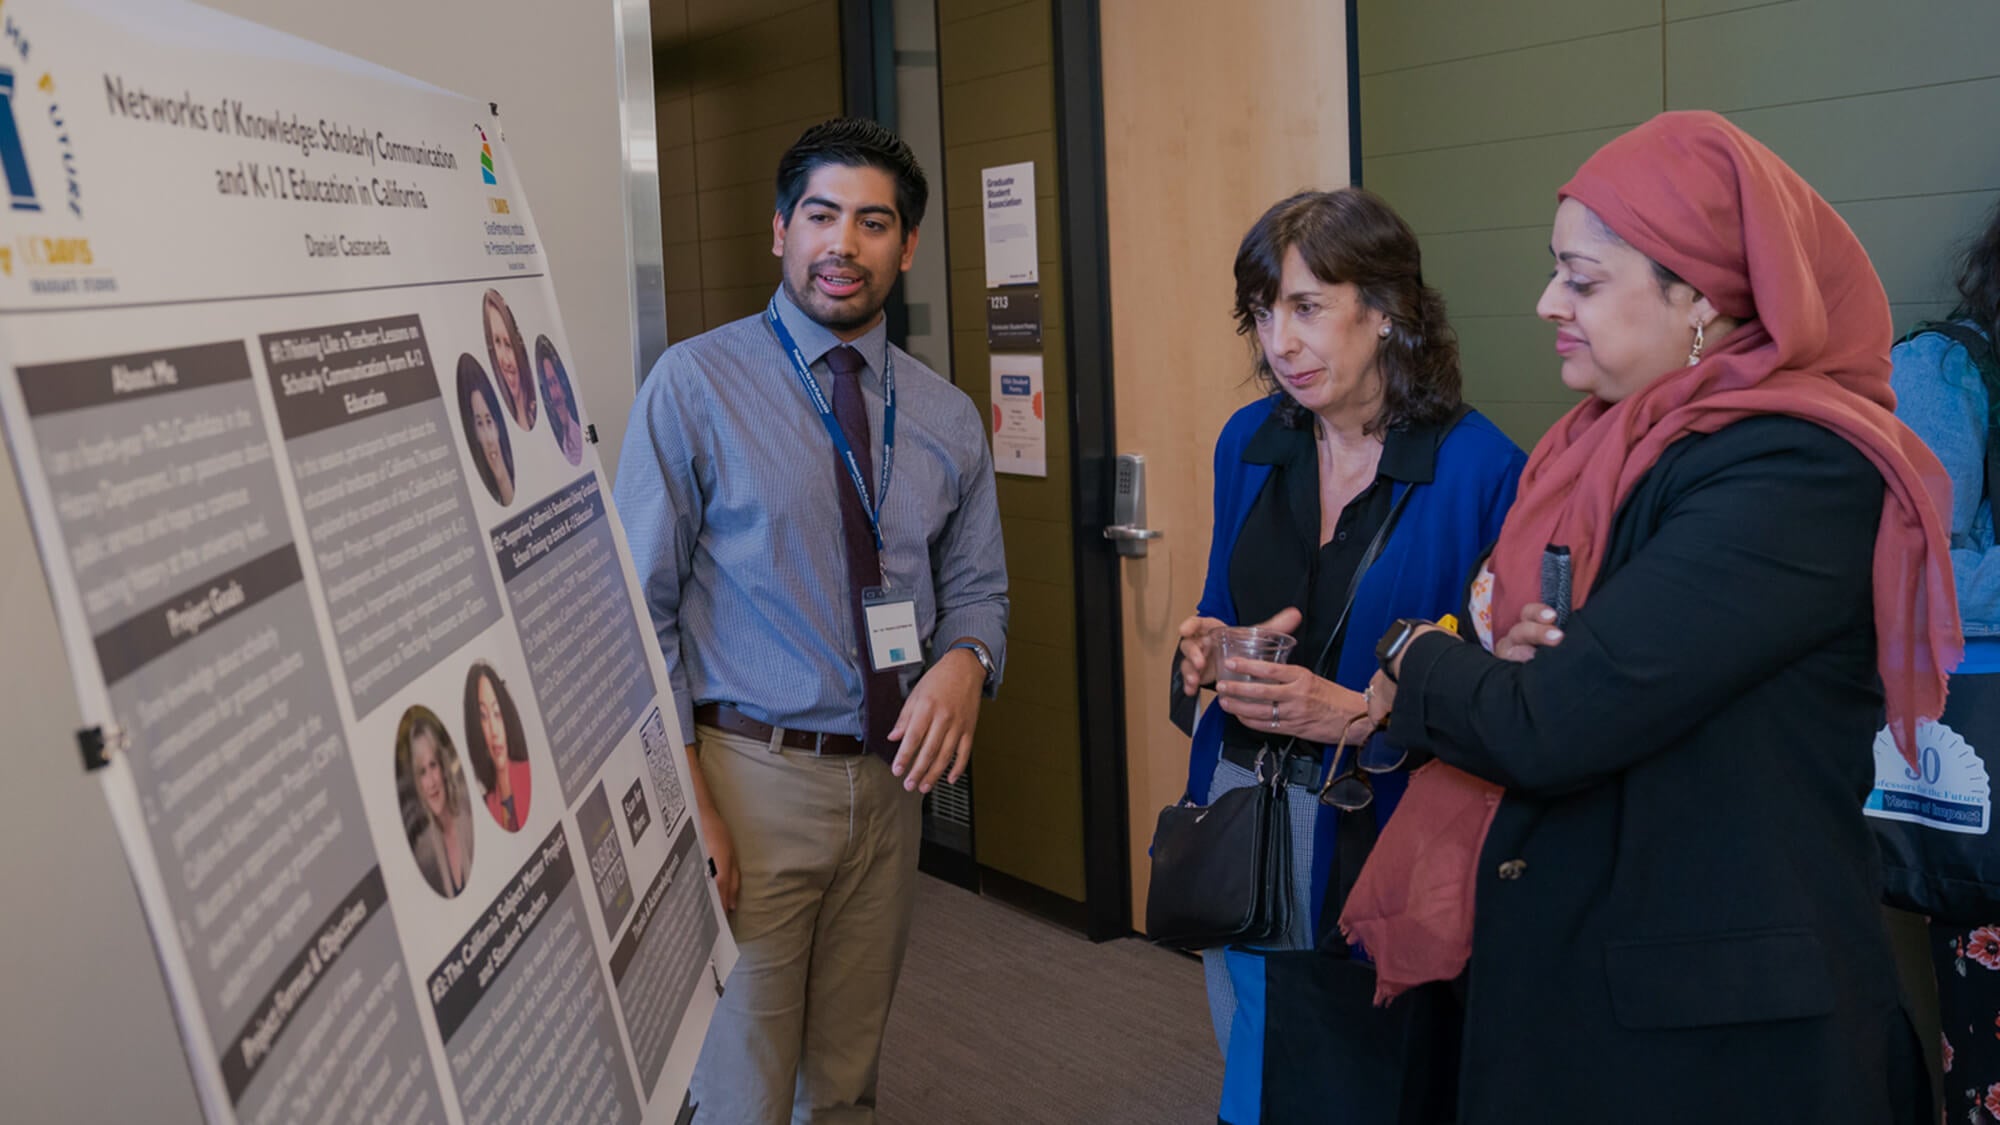 Daniel Cazares, a graduate student at UC Davis, discusses "Networks of Knowledge" and its impact on K-12 education during a research symposium. (TJ Ushing/UC Davis)